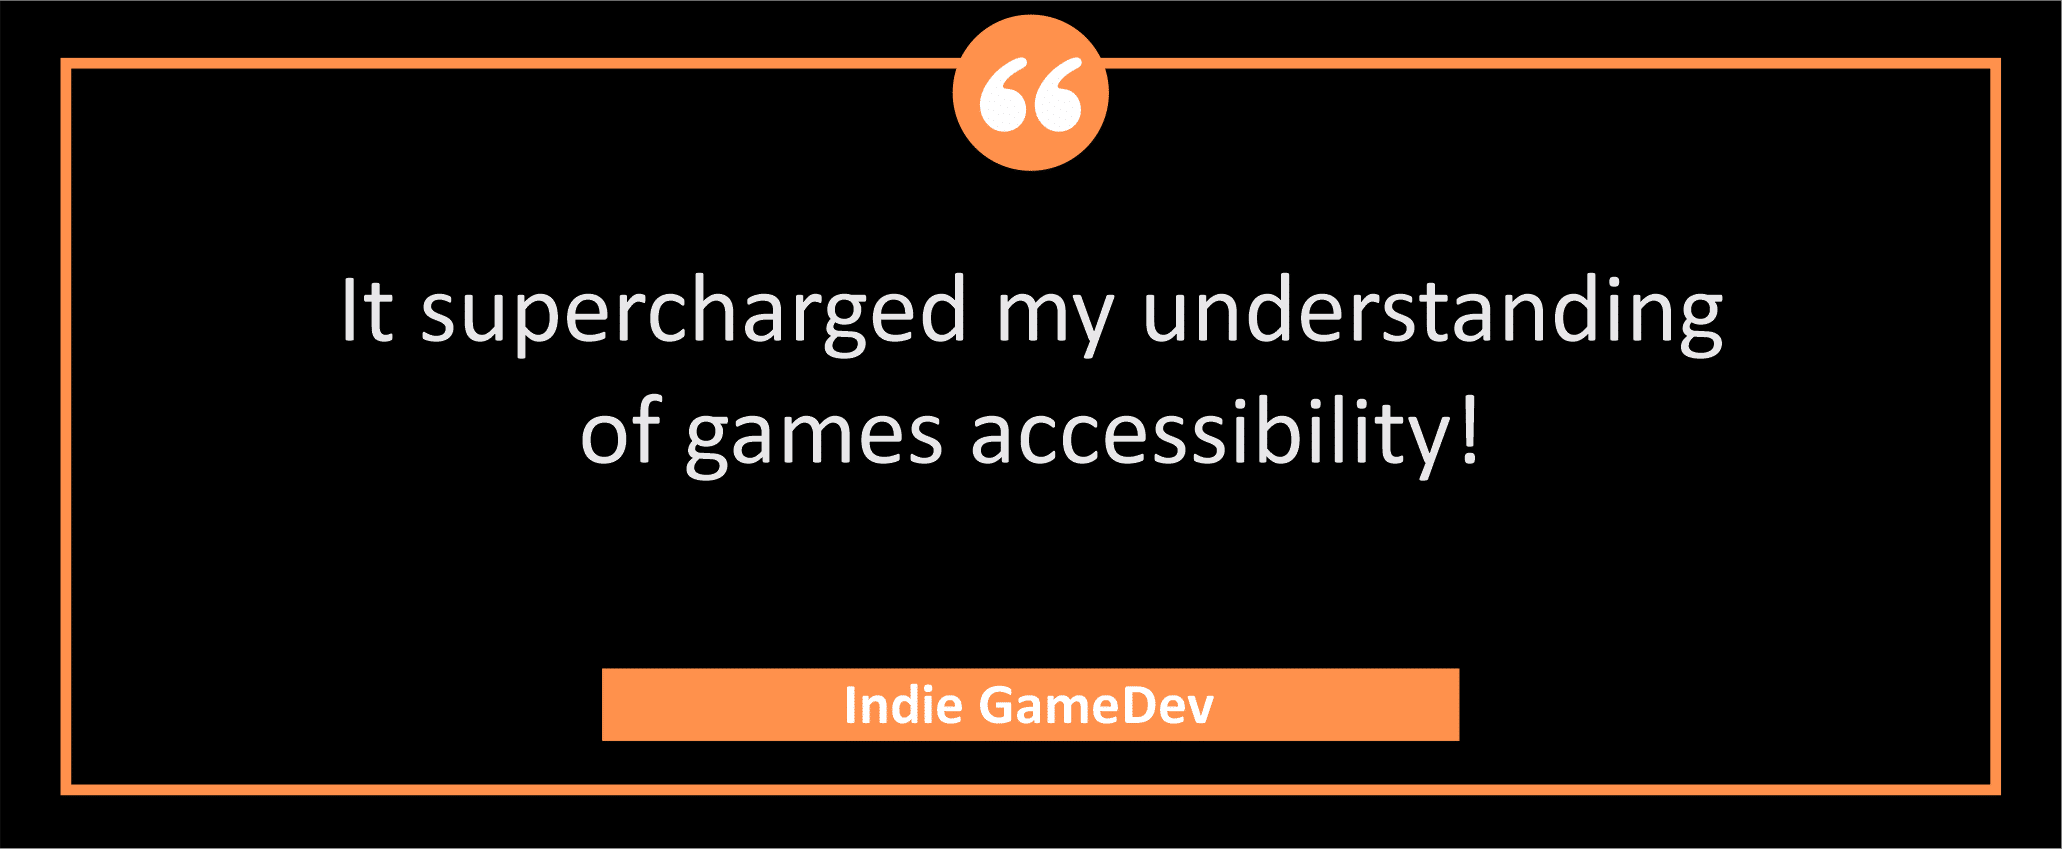 testimonial block - an Indie GameDev wrote, "It supercharged my understanding of games accessibility!"